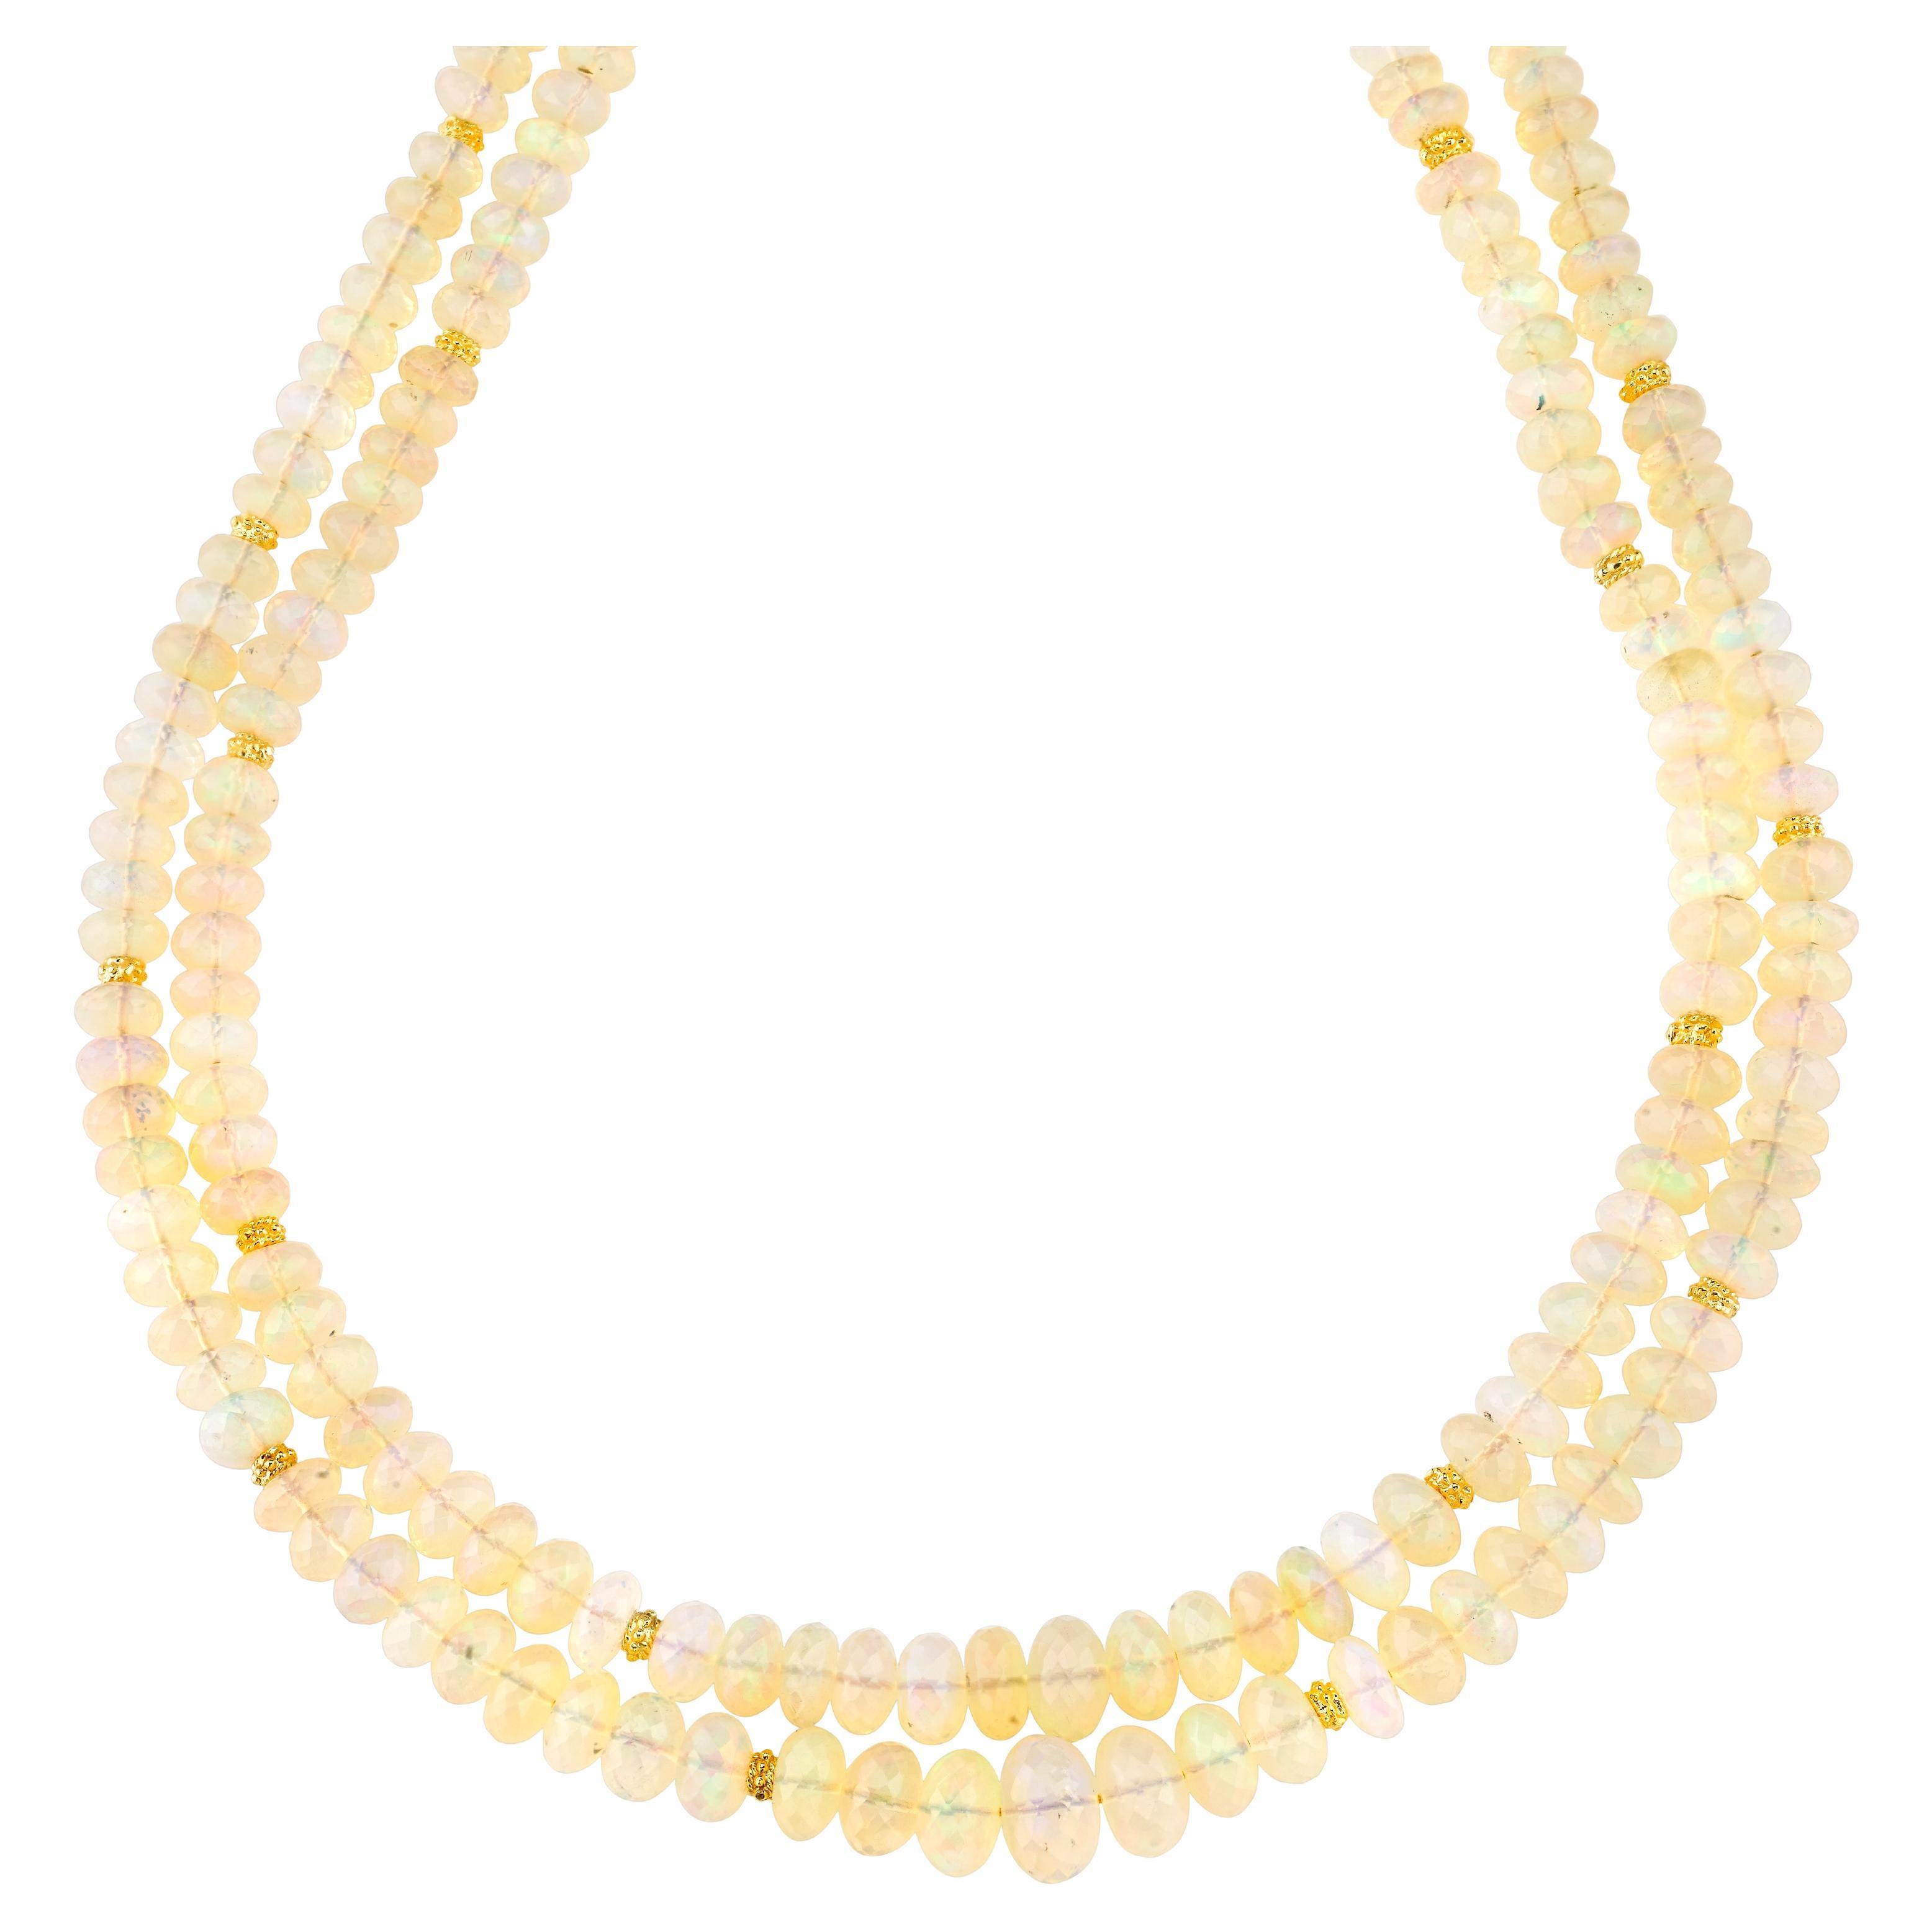 Double Strand Opal Bead Necklace, 170.45 Carats Total with Yellow Gold Accents For Sale